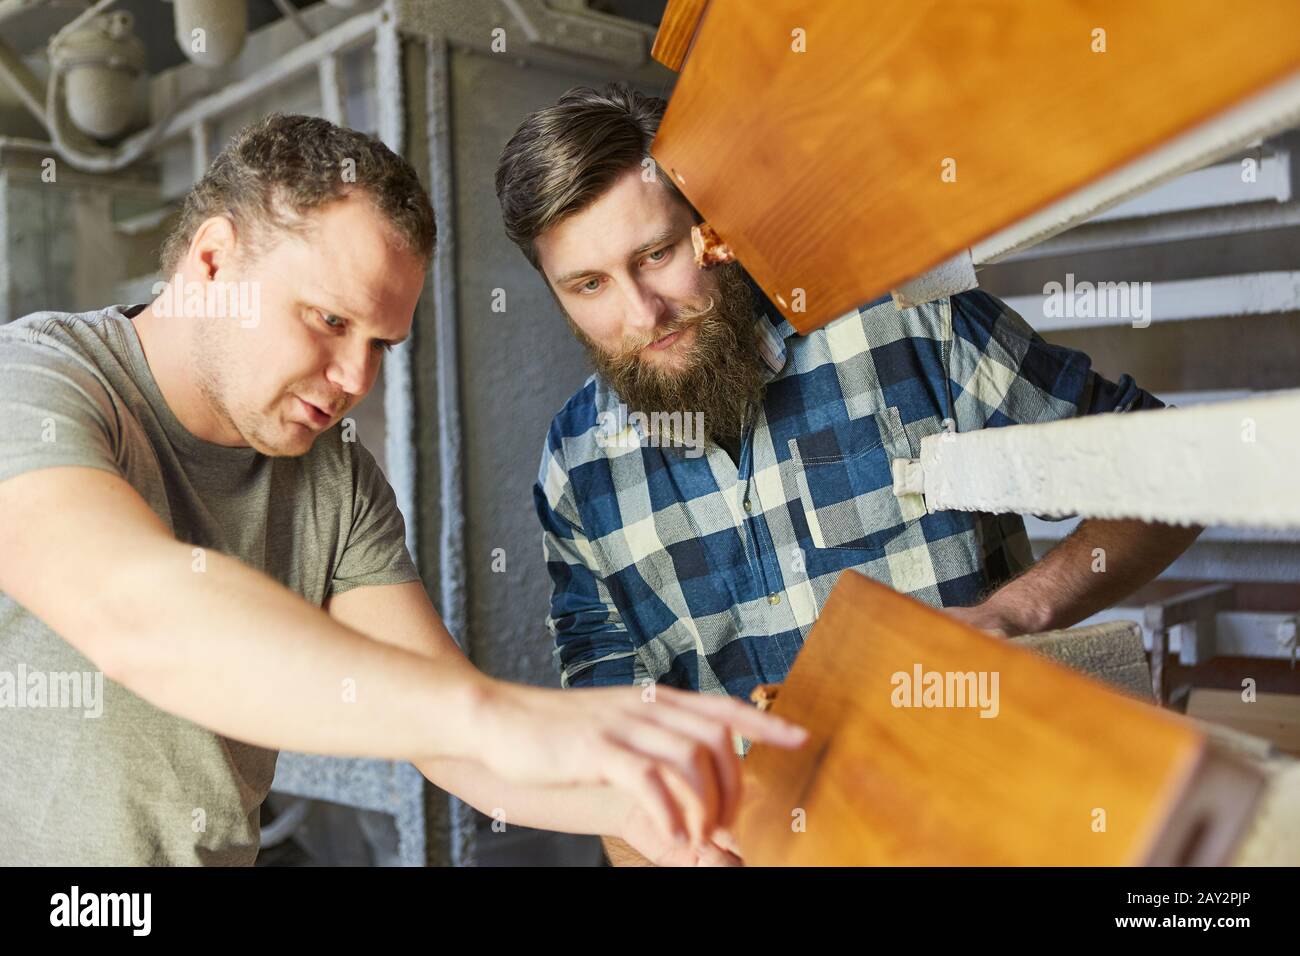 Carpenter apprentice in training and instructor discuss a wooden workpiece Stock Photo